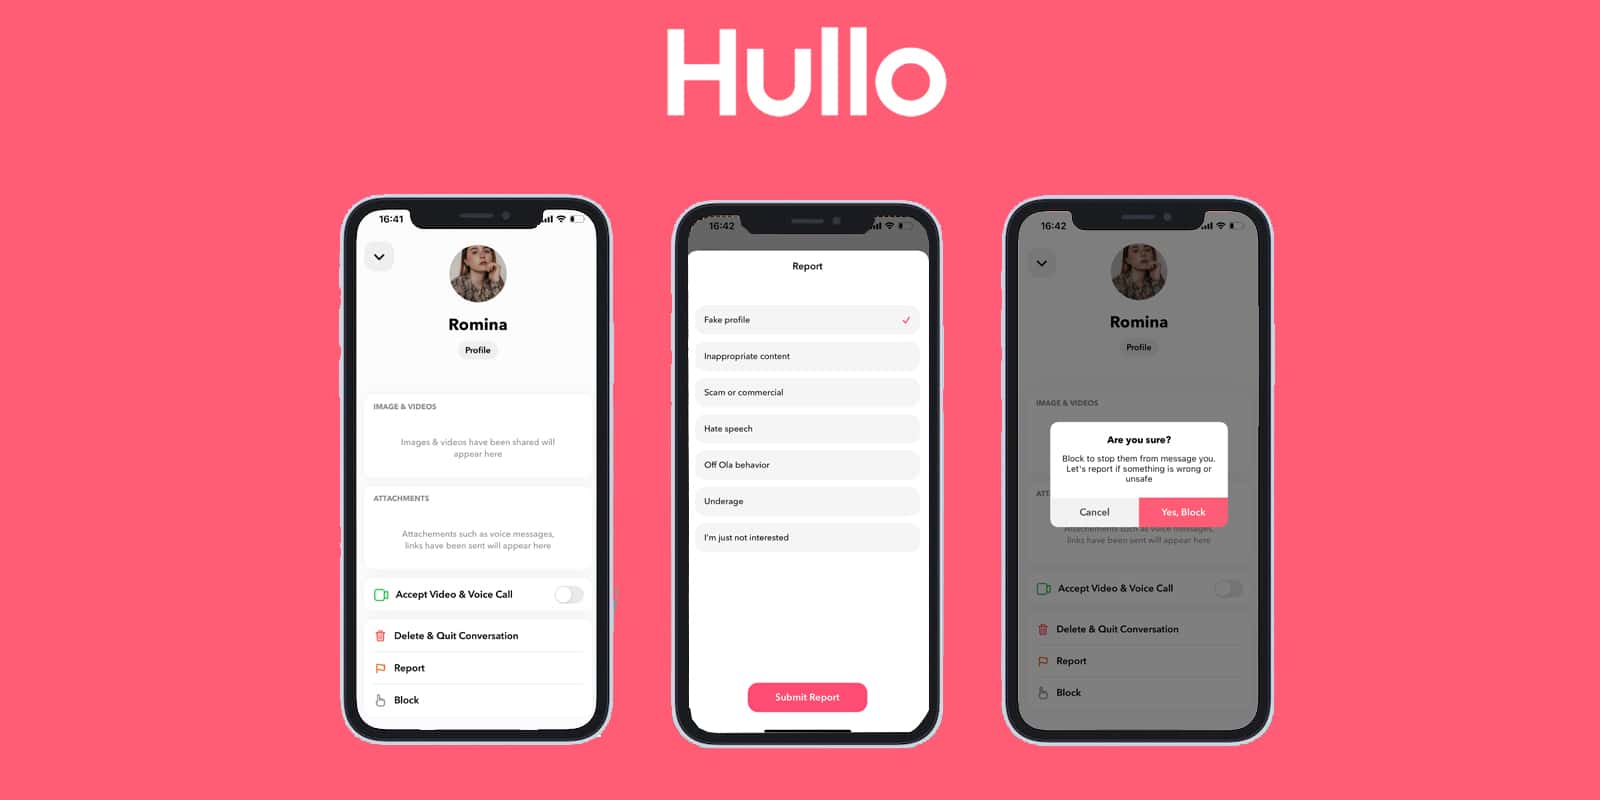 Blocking and reporting function on hullo app